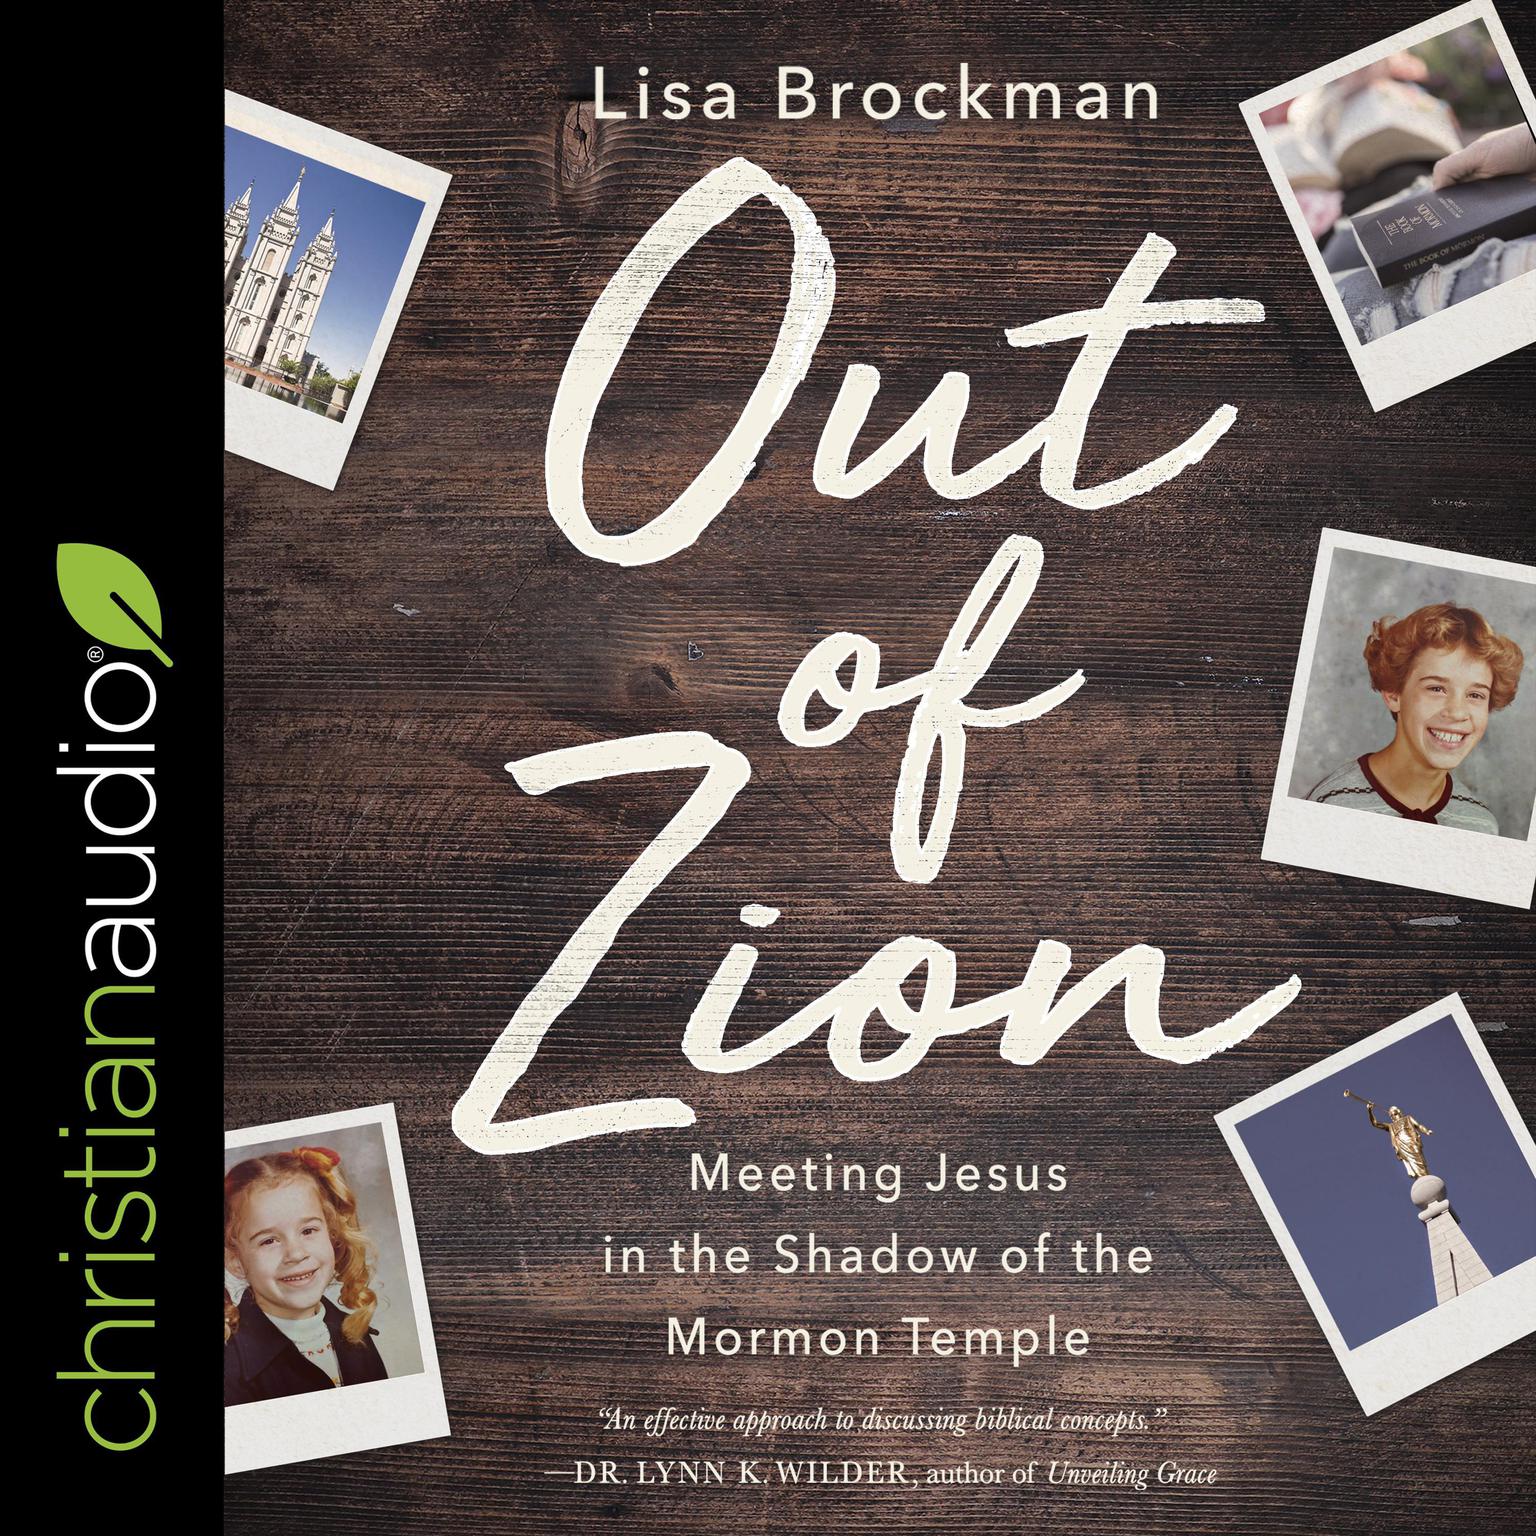 Out of Zion: Meeting Jesus in the Shadow of the Mormon Temple Audiobook, by Lisa Brockman